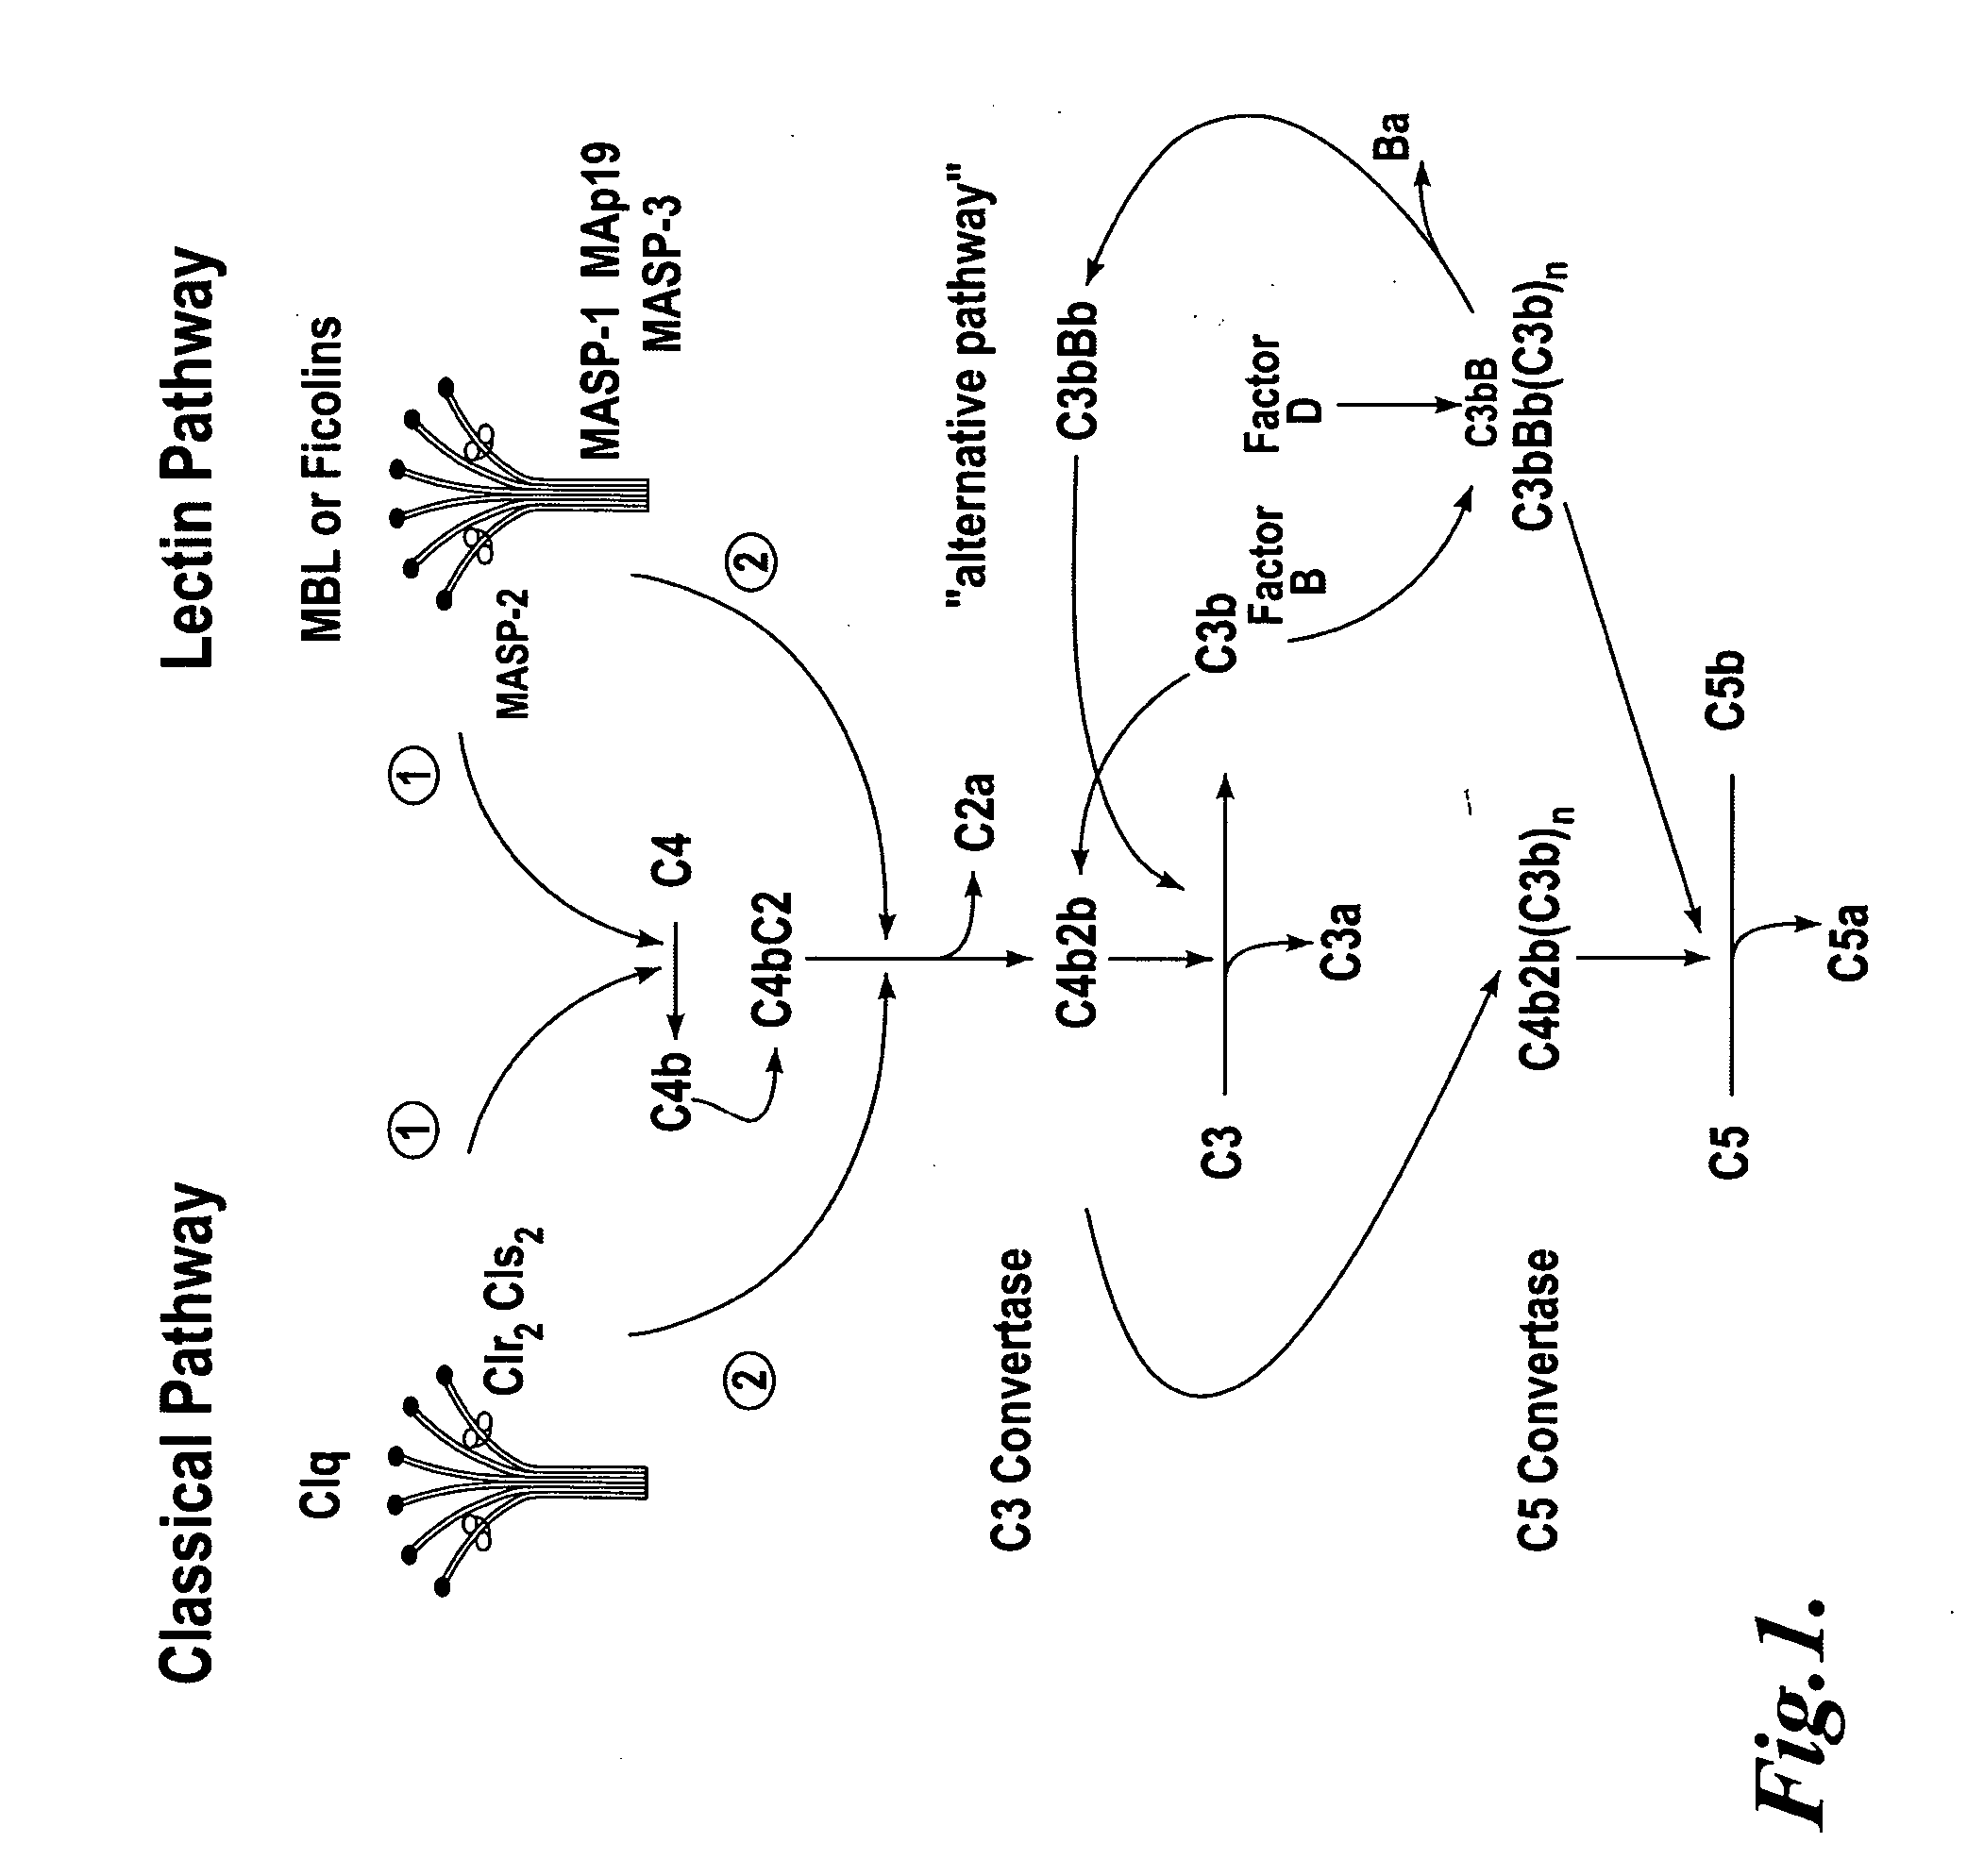 Methods for treating conditions associated with MASP-2 dependent complement activation